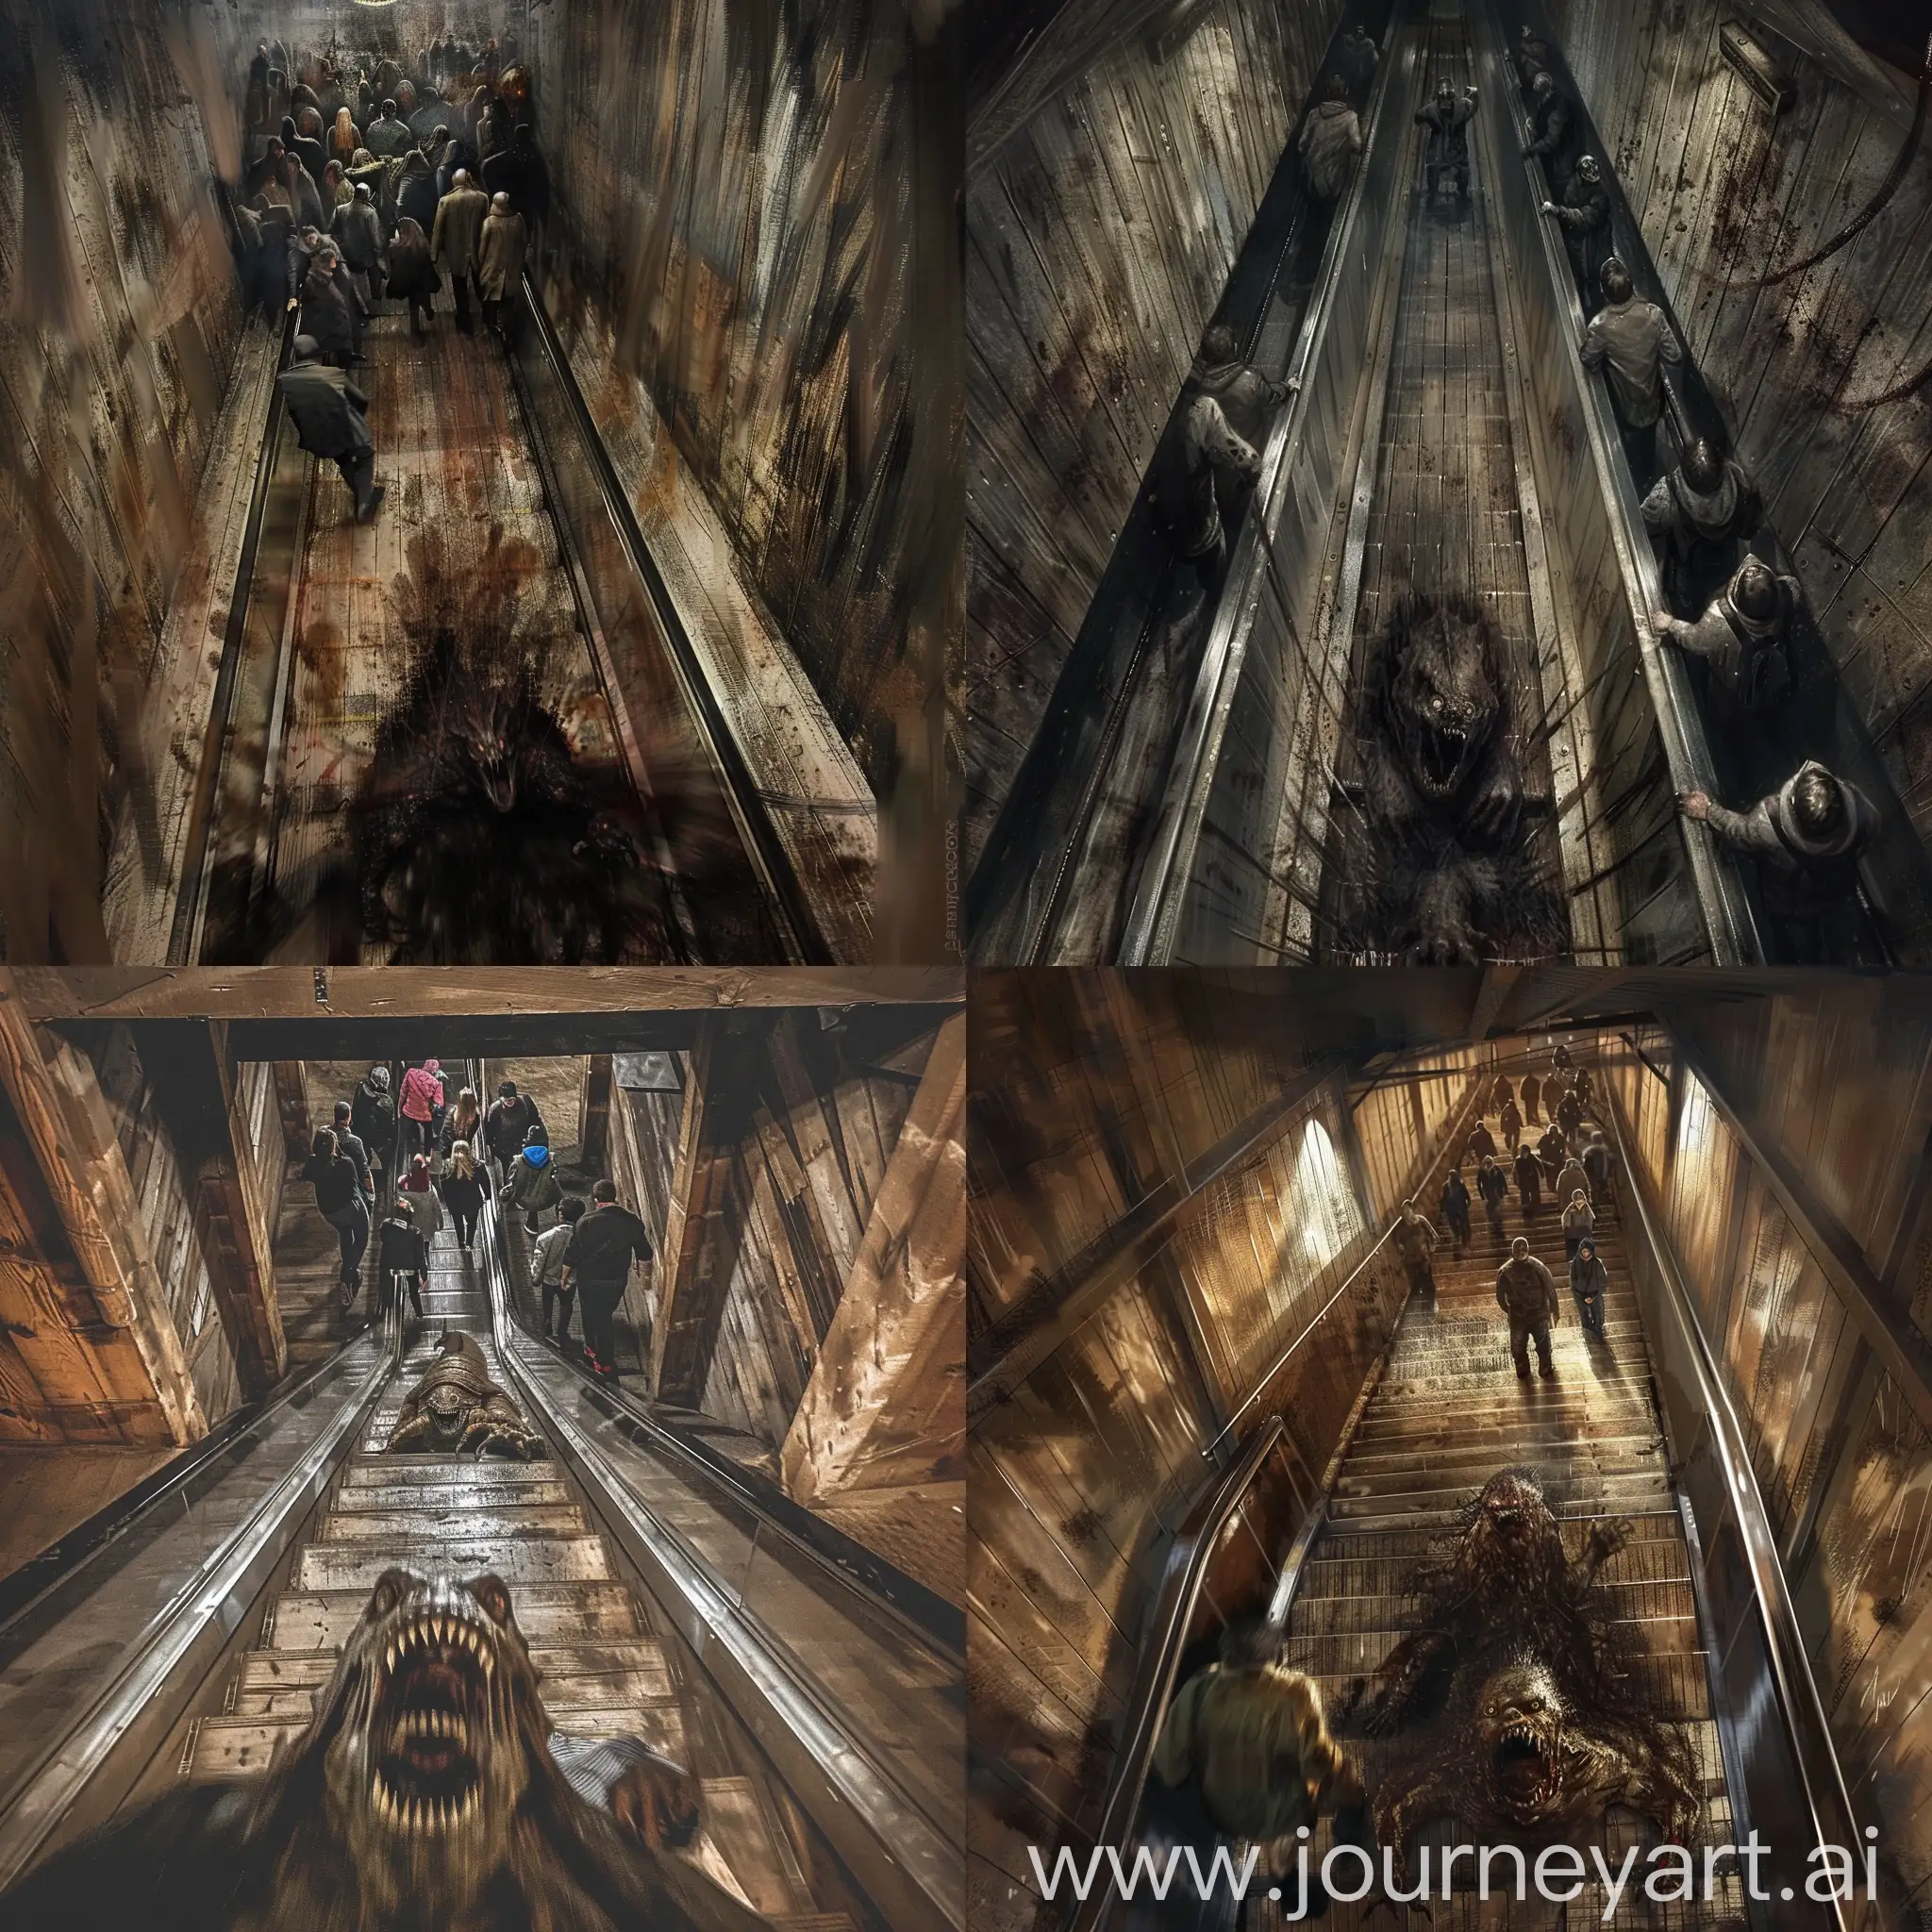 Wooden-Subway-Escalator-with-Frightened-Commuters-and-Gothic-Monster